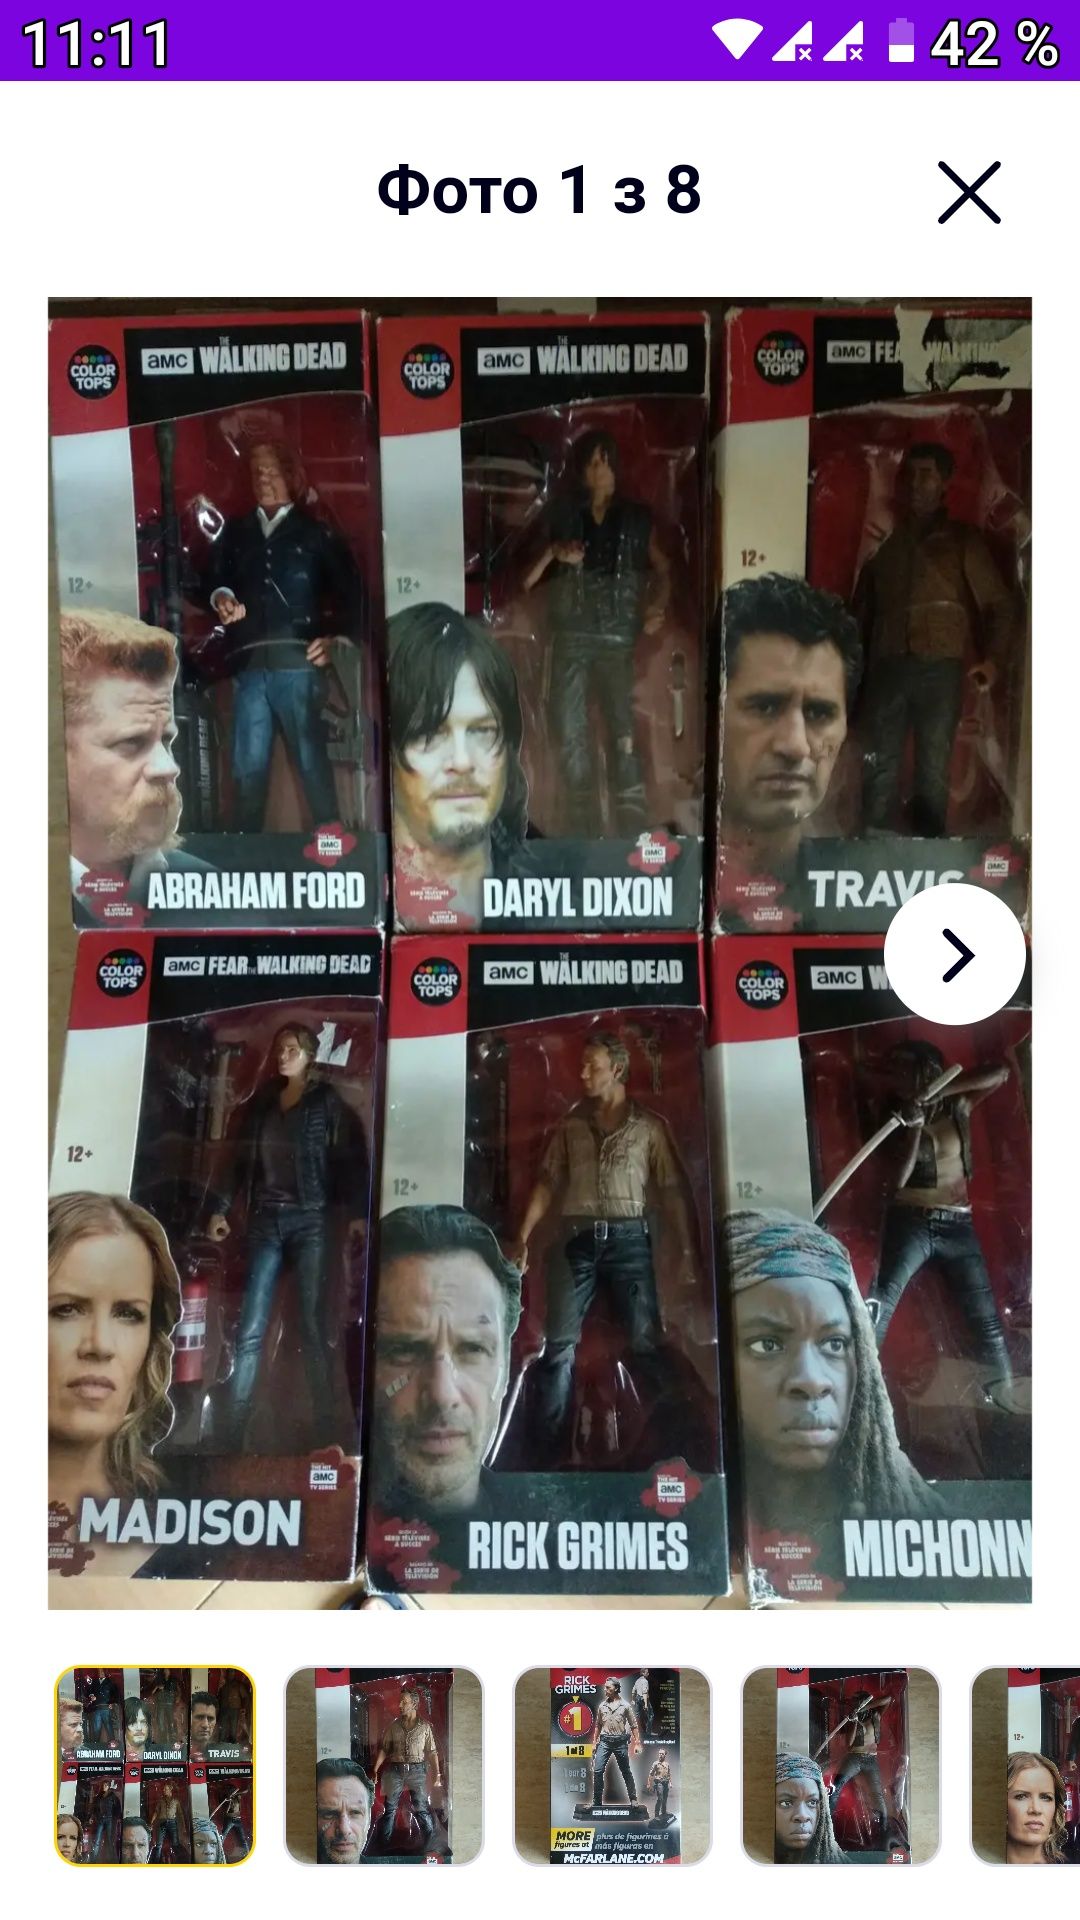 McFarlane Toys Color Top 7" Series AMC Fear The Walking Dead

Madison